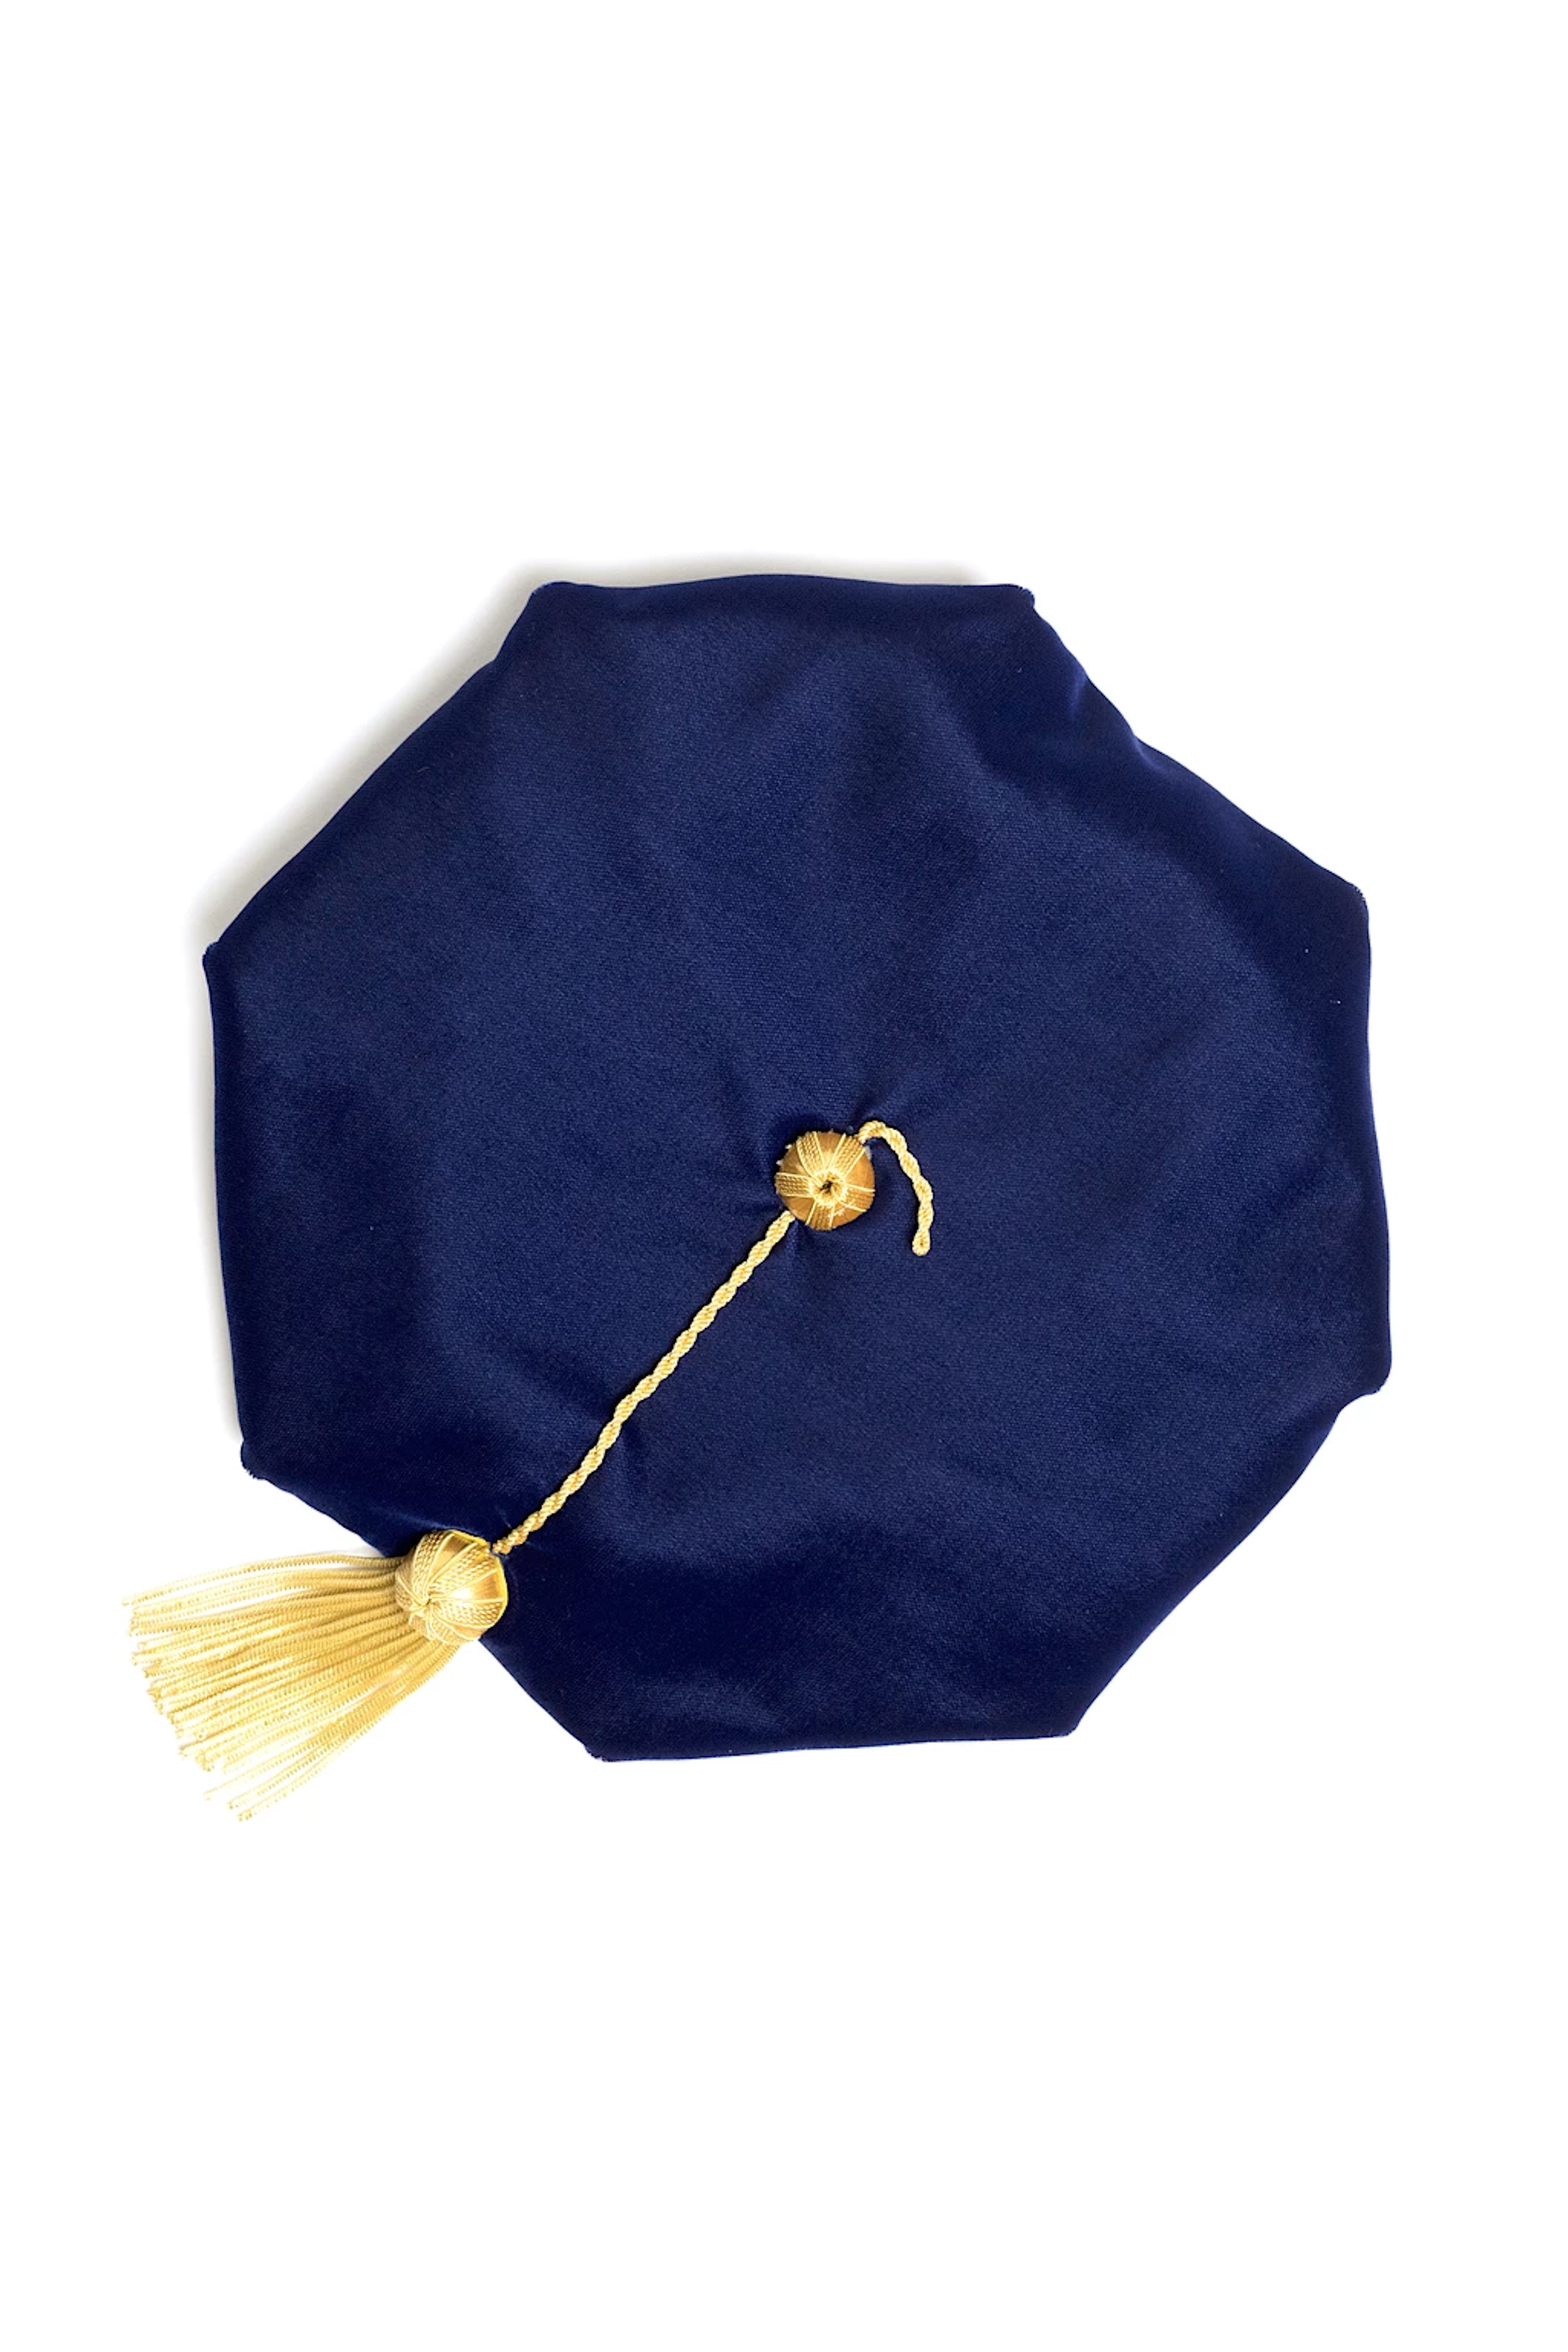 University of Pennsylvania 8-Sided Doctoral Tam (Cap) with Gold Tassel